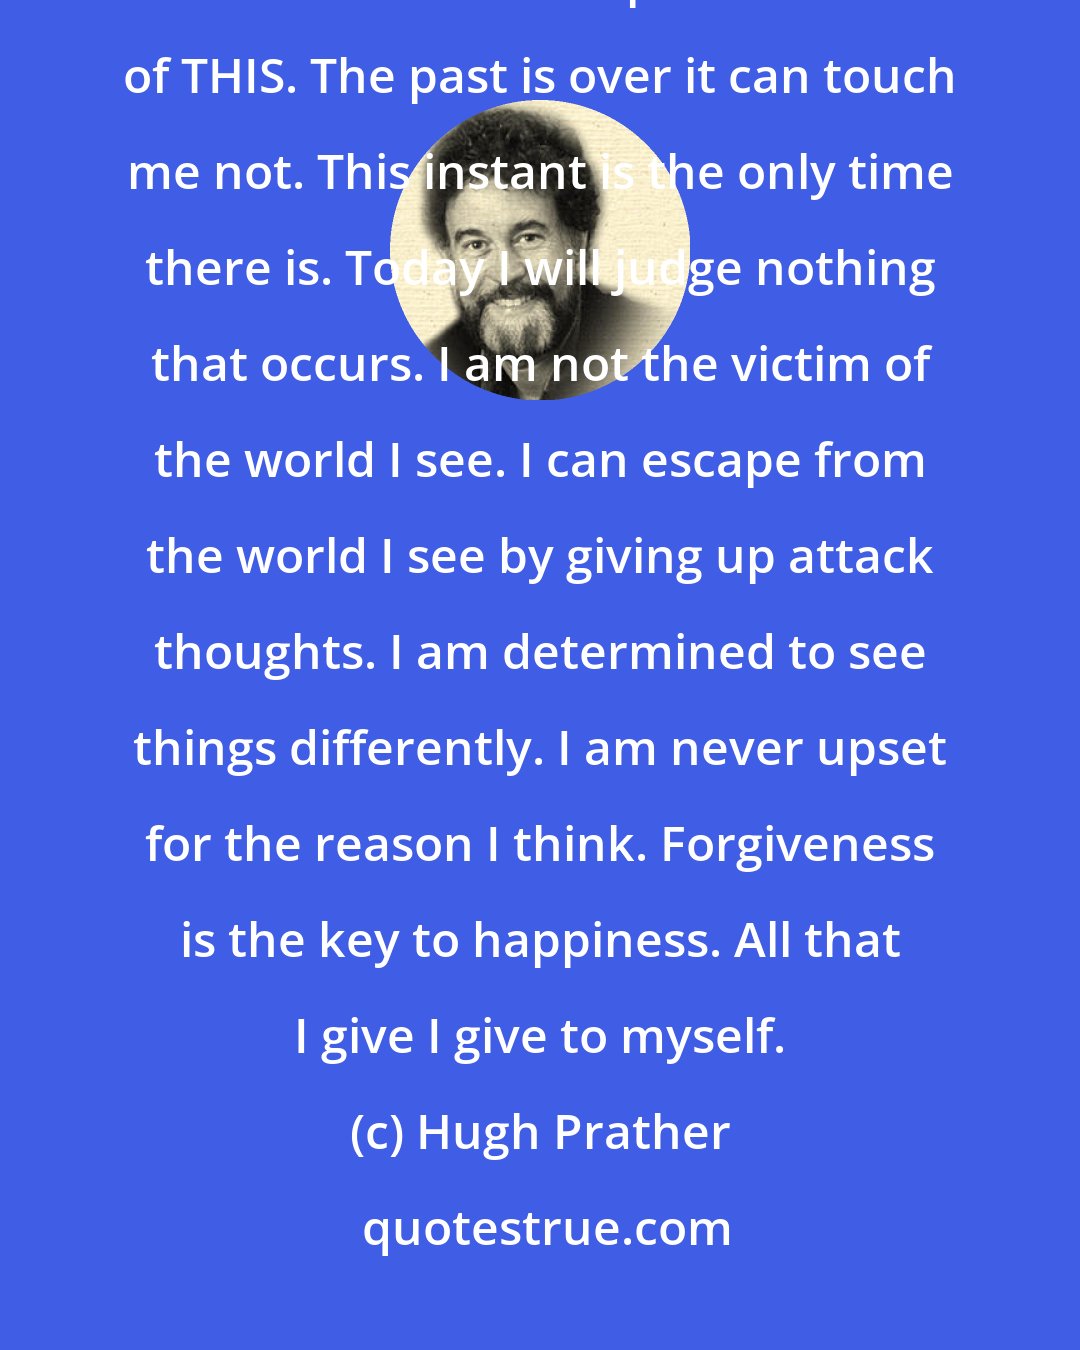 Hugh Prather: I am responsible for what I see. I can elect to change all thoughts that hurt. I could see peace instead of THIS. The past is over it can touch me not. This instant is the only time there is. Today I will judge nothing that occurs. I am not the victim of the world I see. I can escape from the world I see by giving up attack thoughts. I am determined to see things differently. I am never upset for the reason I think. Forgiveness is the key to happiness. All that I give I give to myself.